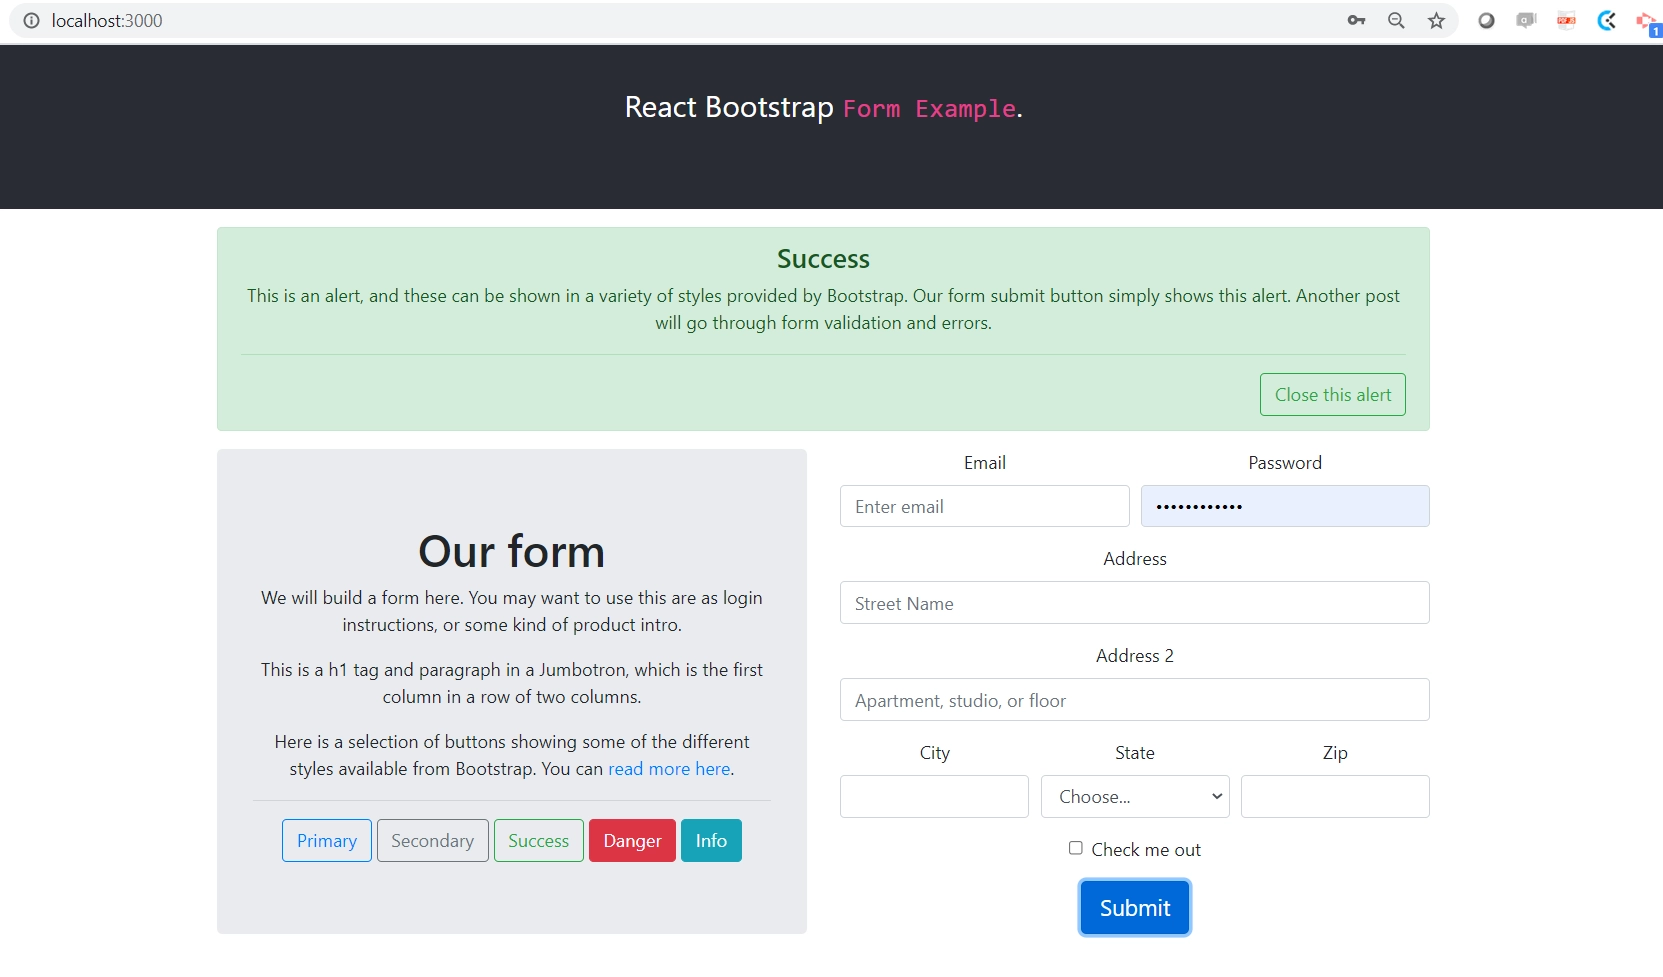 a react bootstrap form example